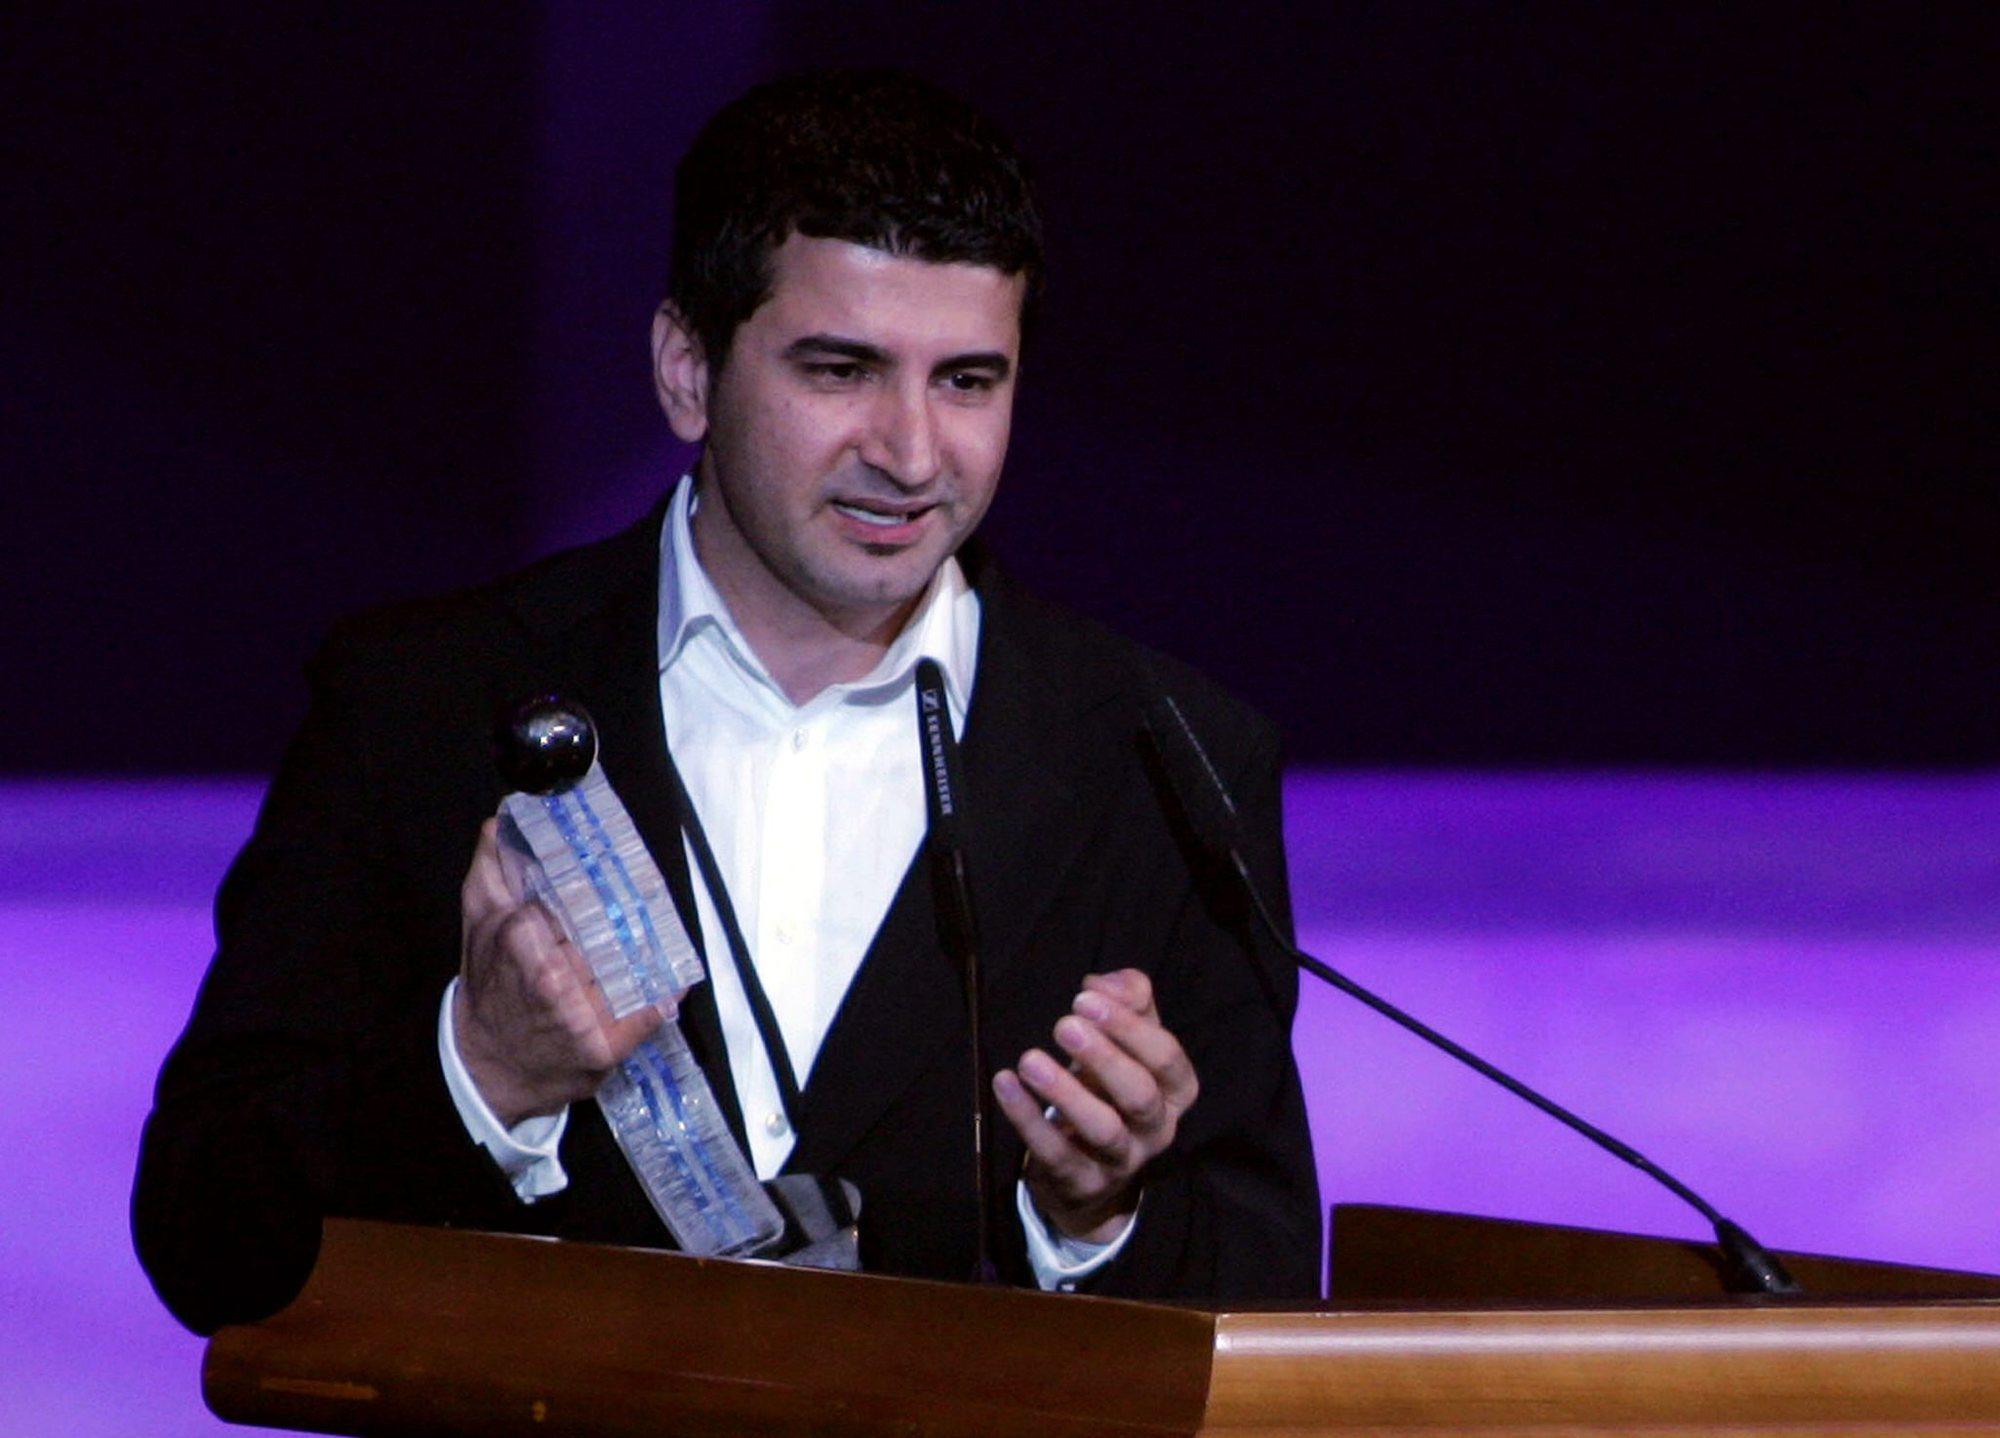 Norway-based Iraqi Kurdish director Hisham Zaman accepts the award for best short film for 'Bawke' (Father) during the Middle East International Film Festival (MEIFF) awards ceremony in Abu Dhabi, 19 October 2007. Abu Dhabi hosted its maiden film festival this week as it vies to become a regional cinema hub with plans to open a branch of the New York Film Academy. The festival featured more than 80 films from 38 countries. AFP PHOTO/Karim SAHIB